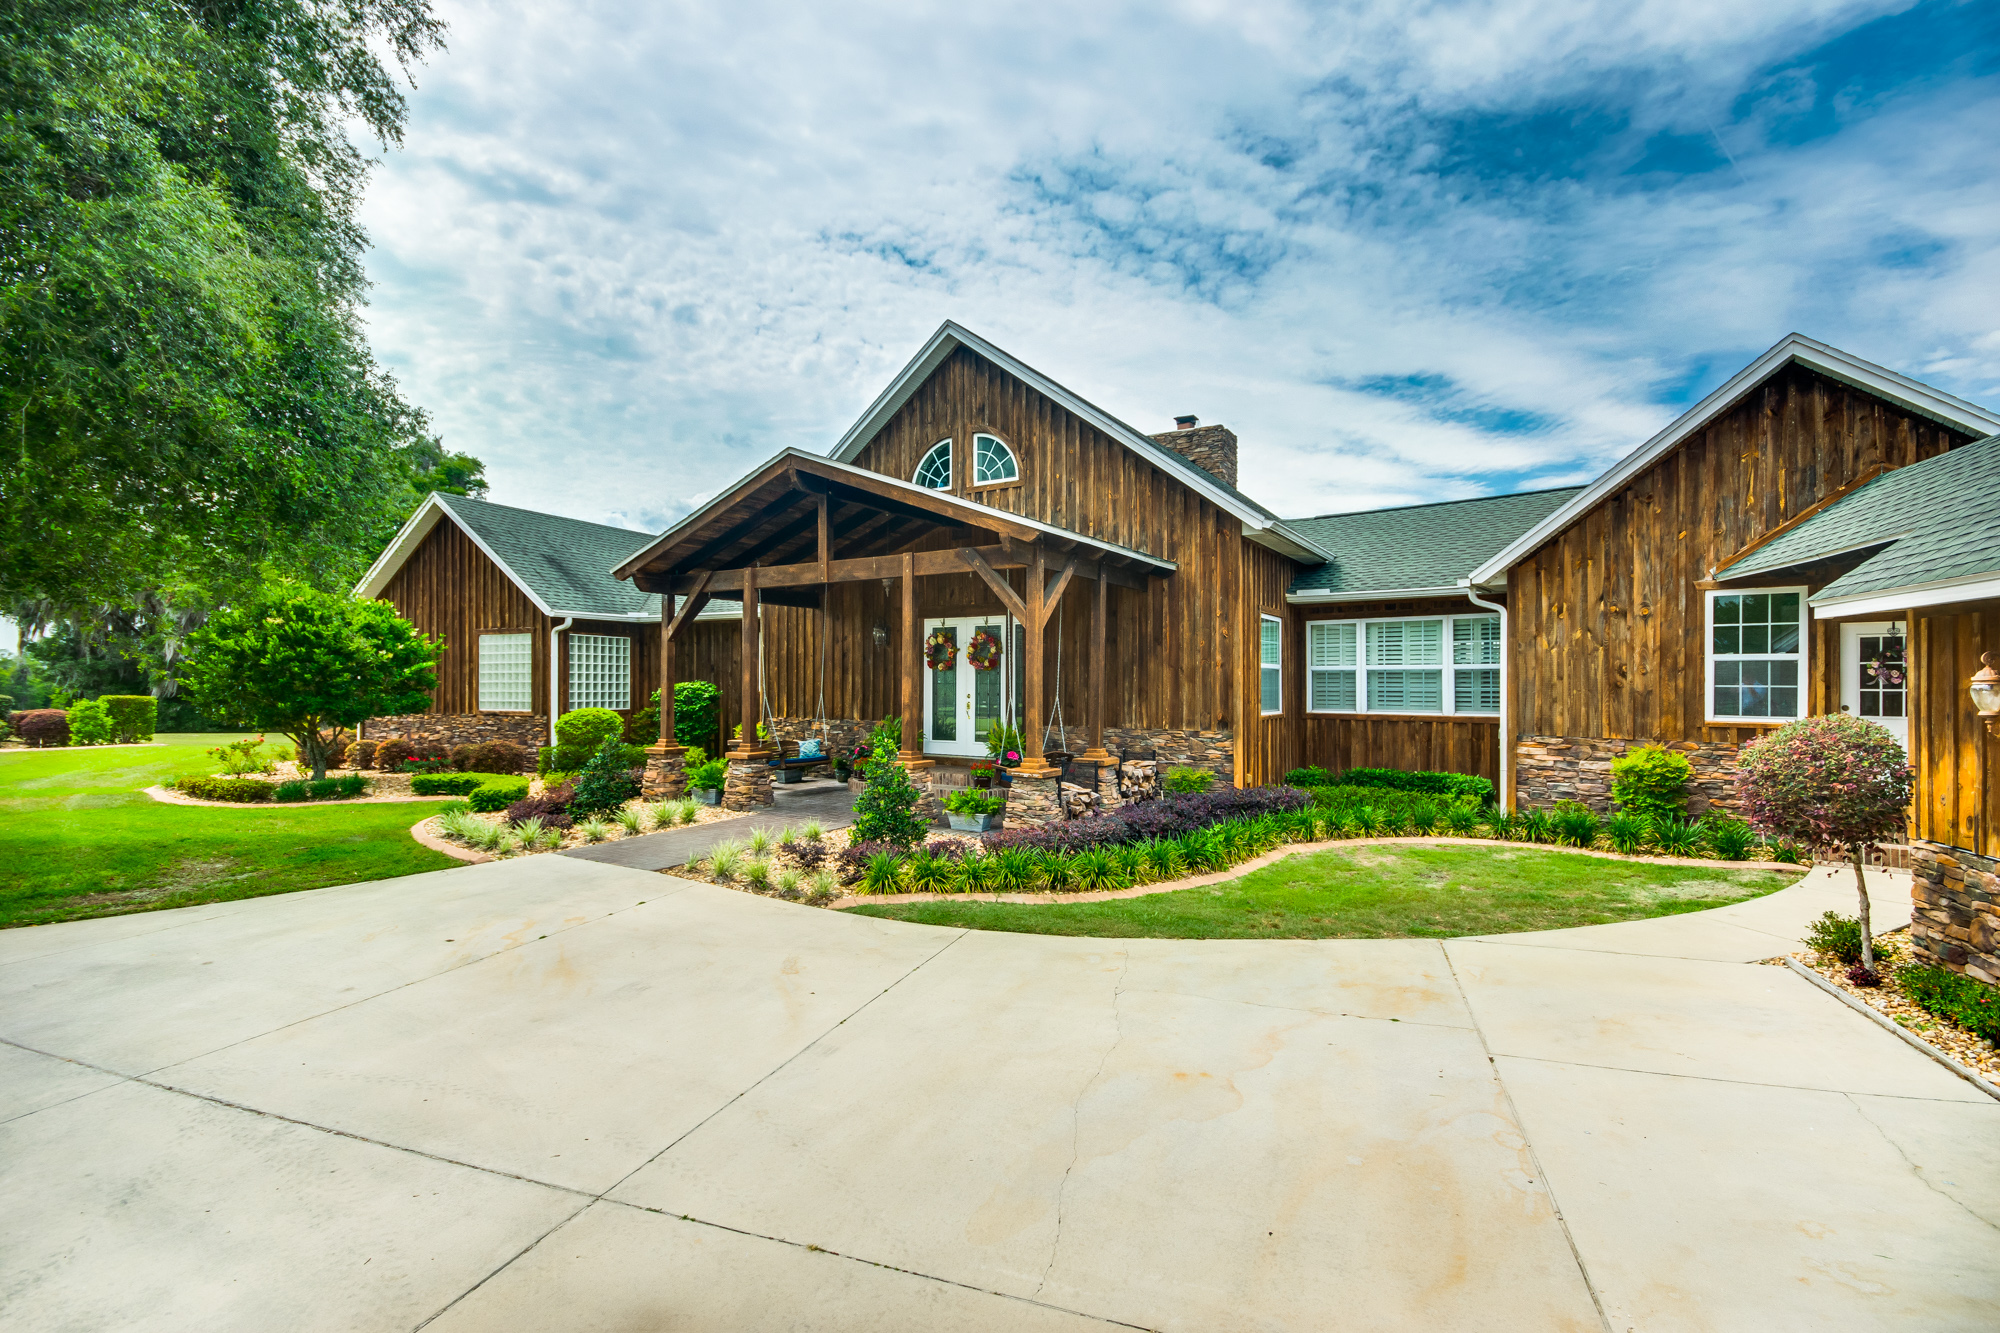 Log Cabin Homes | Rustic and Luxurious Log Cabin Homes in Central Florida